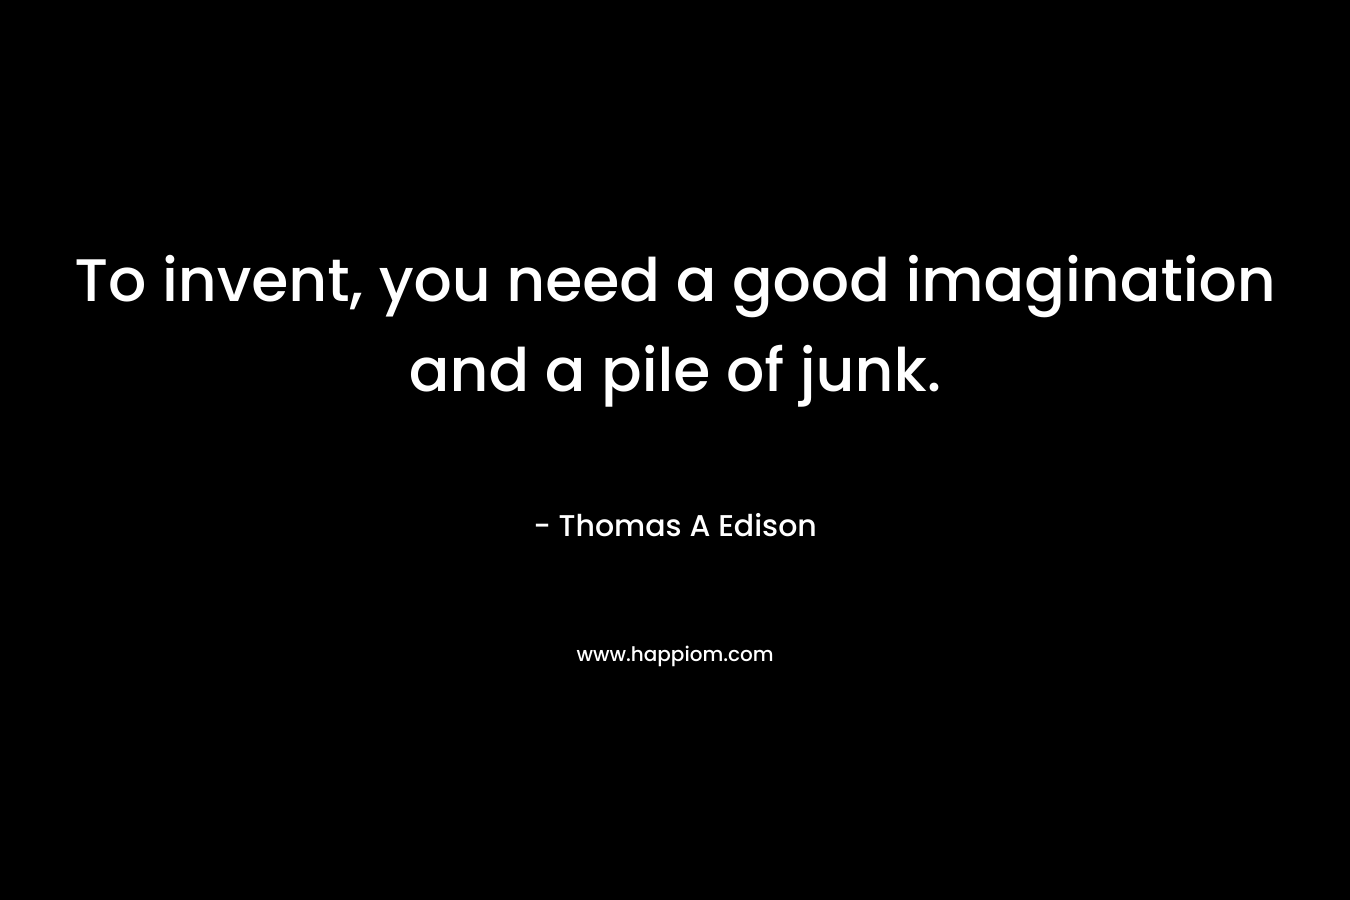 To invent, you need a good imagination and a pile of junk. – Thomas A Edison